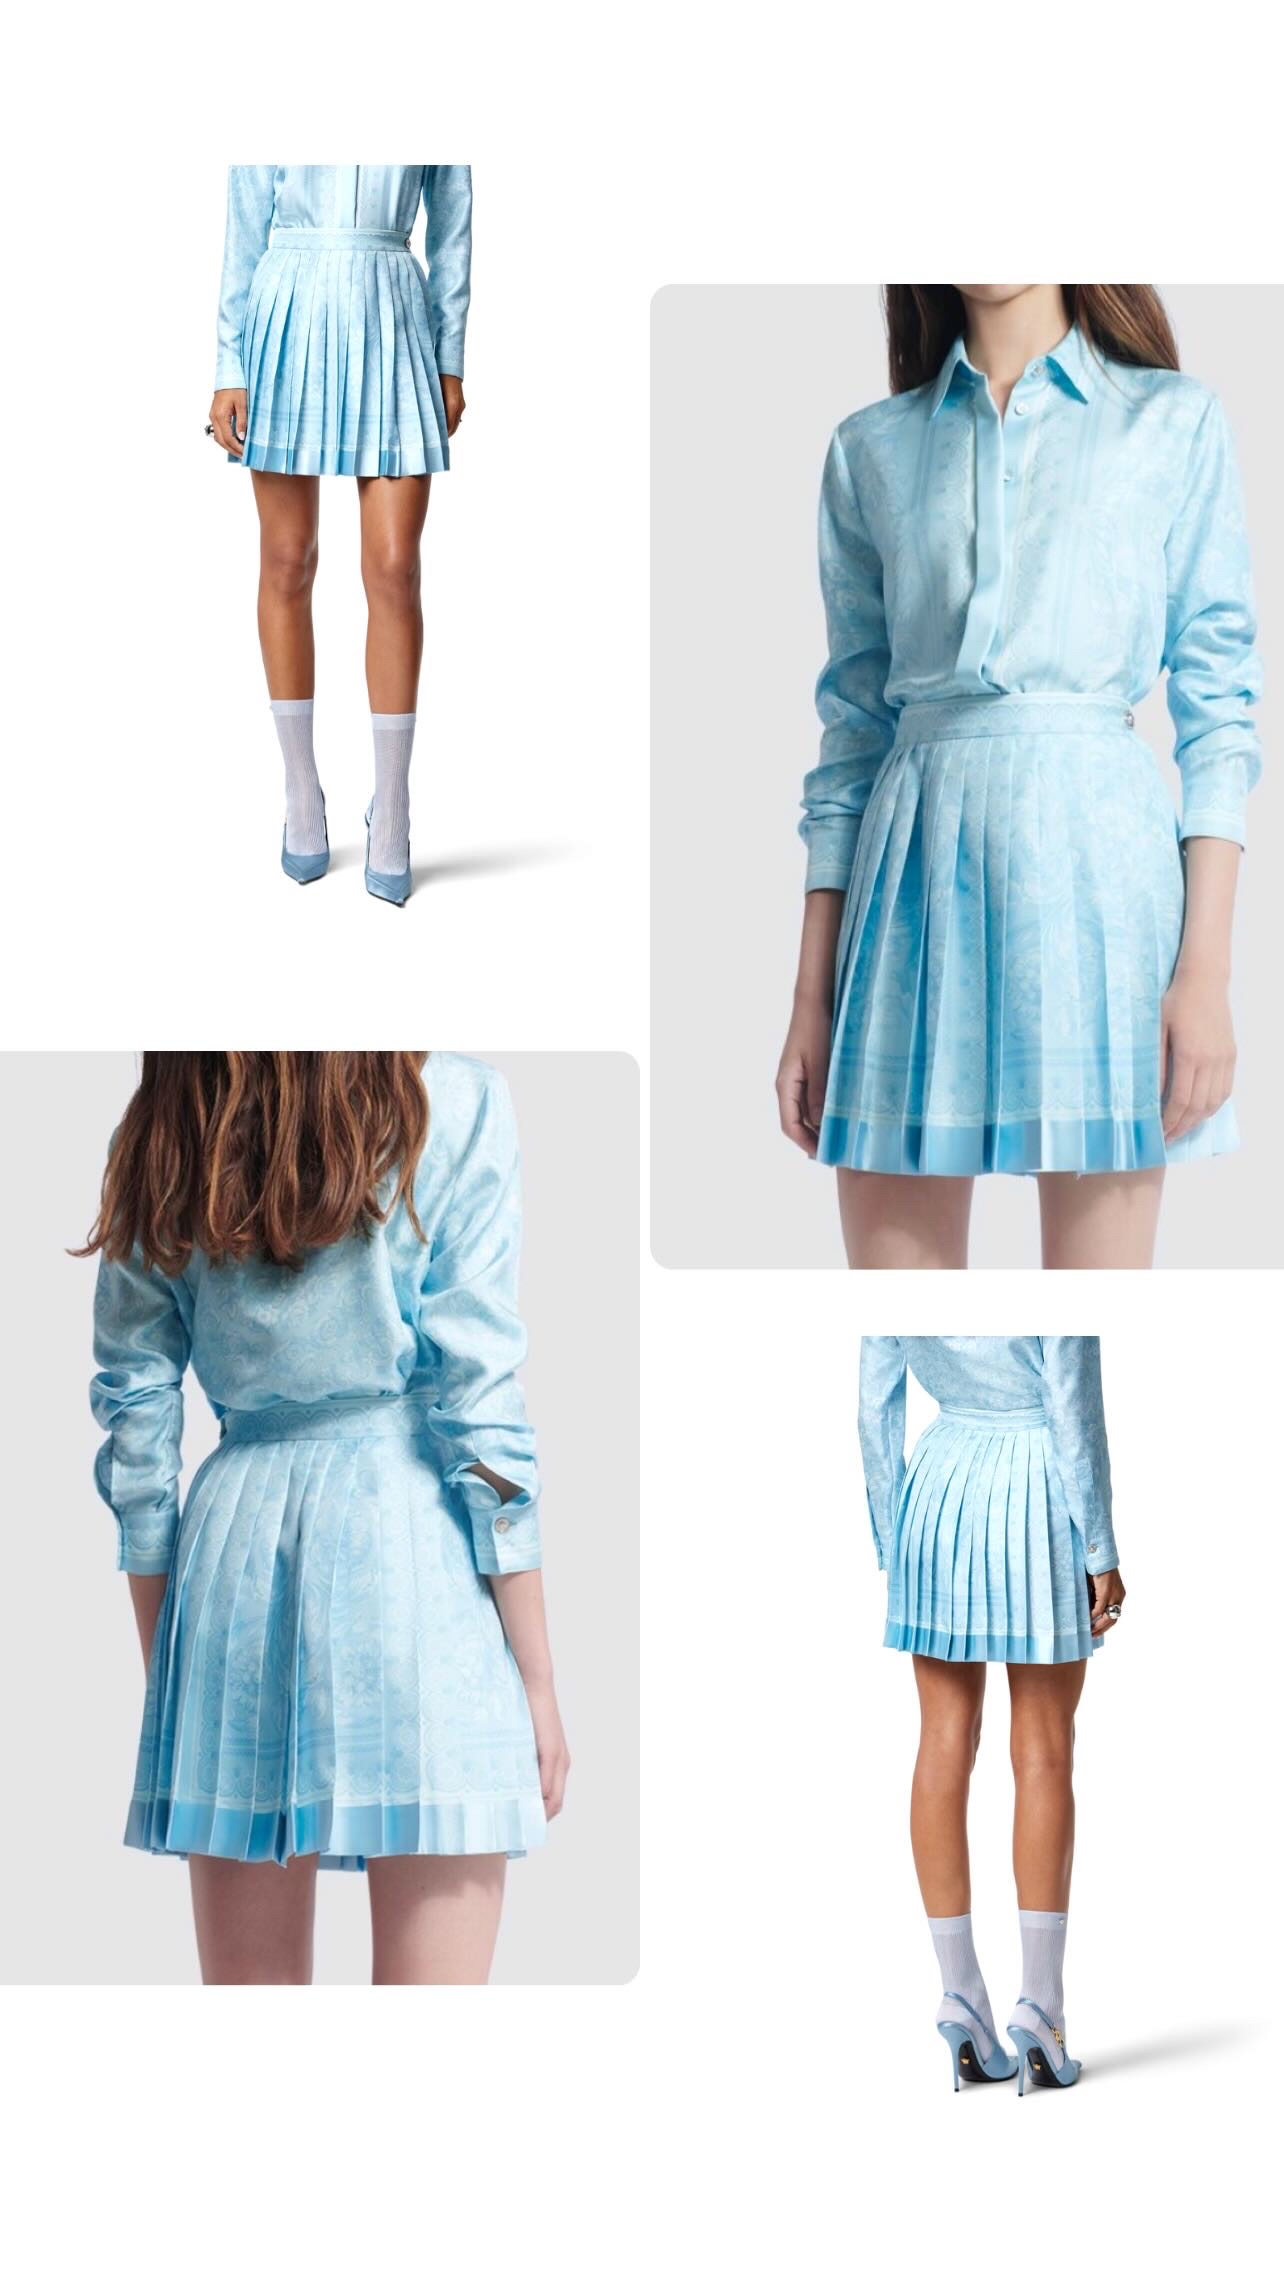 Versace - Barocco Silk Shirt & Pleated Skirt - Full Blue Outfit